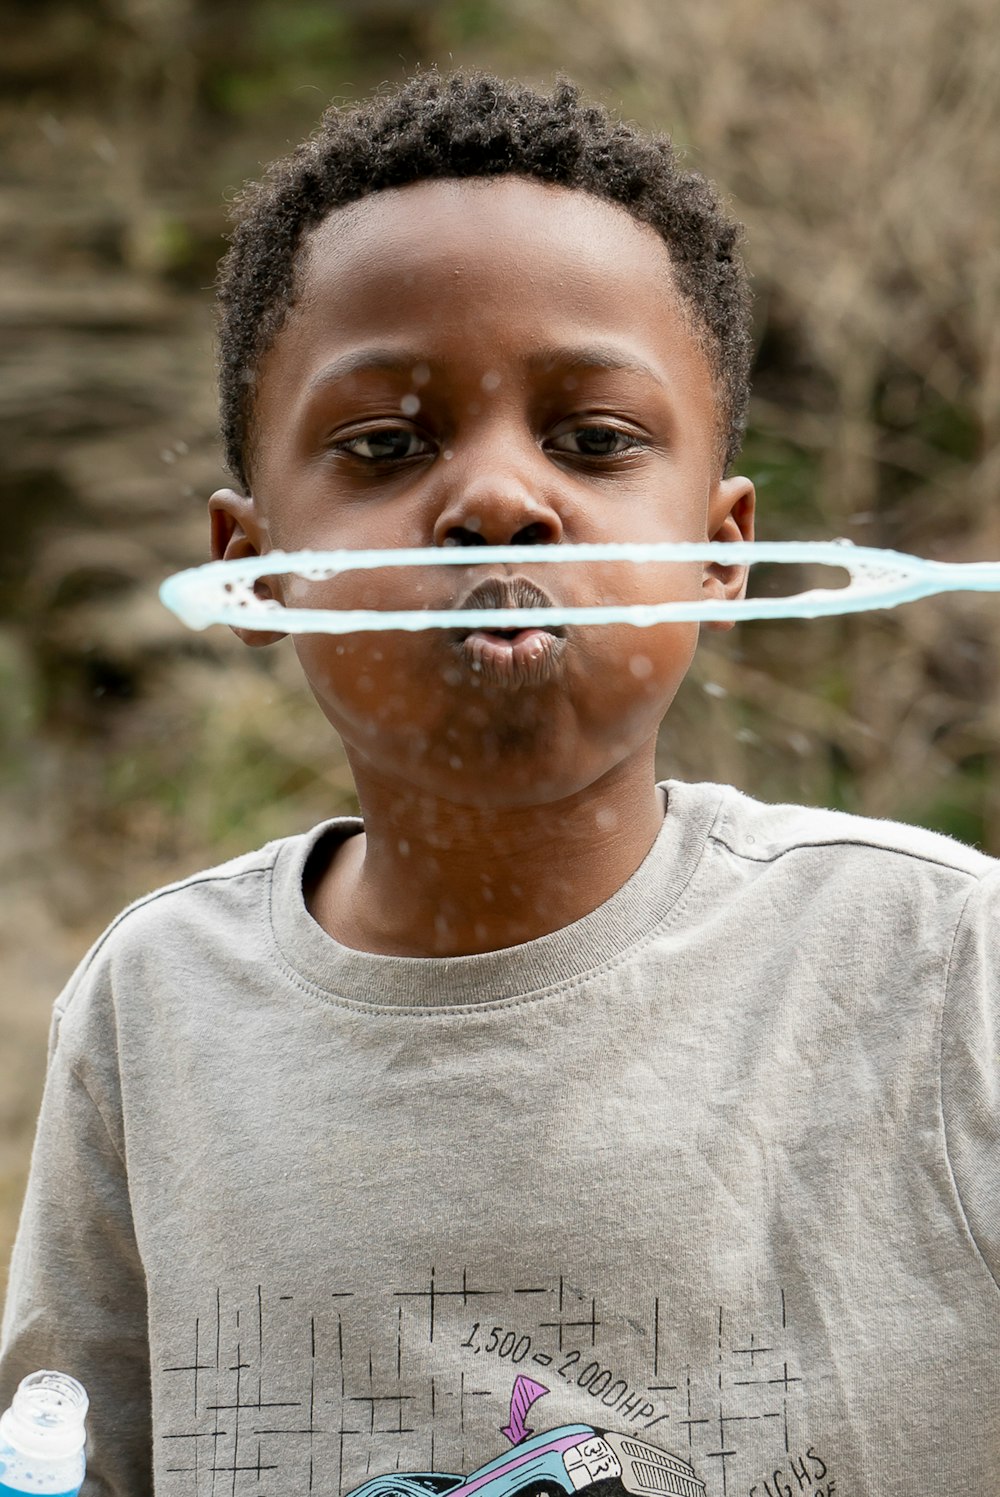 a boy with a tube in his mouth